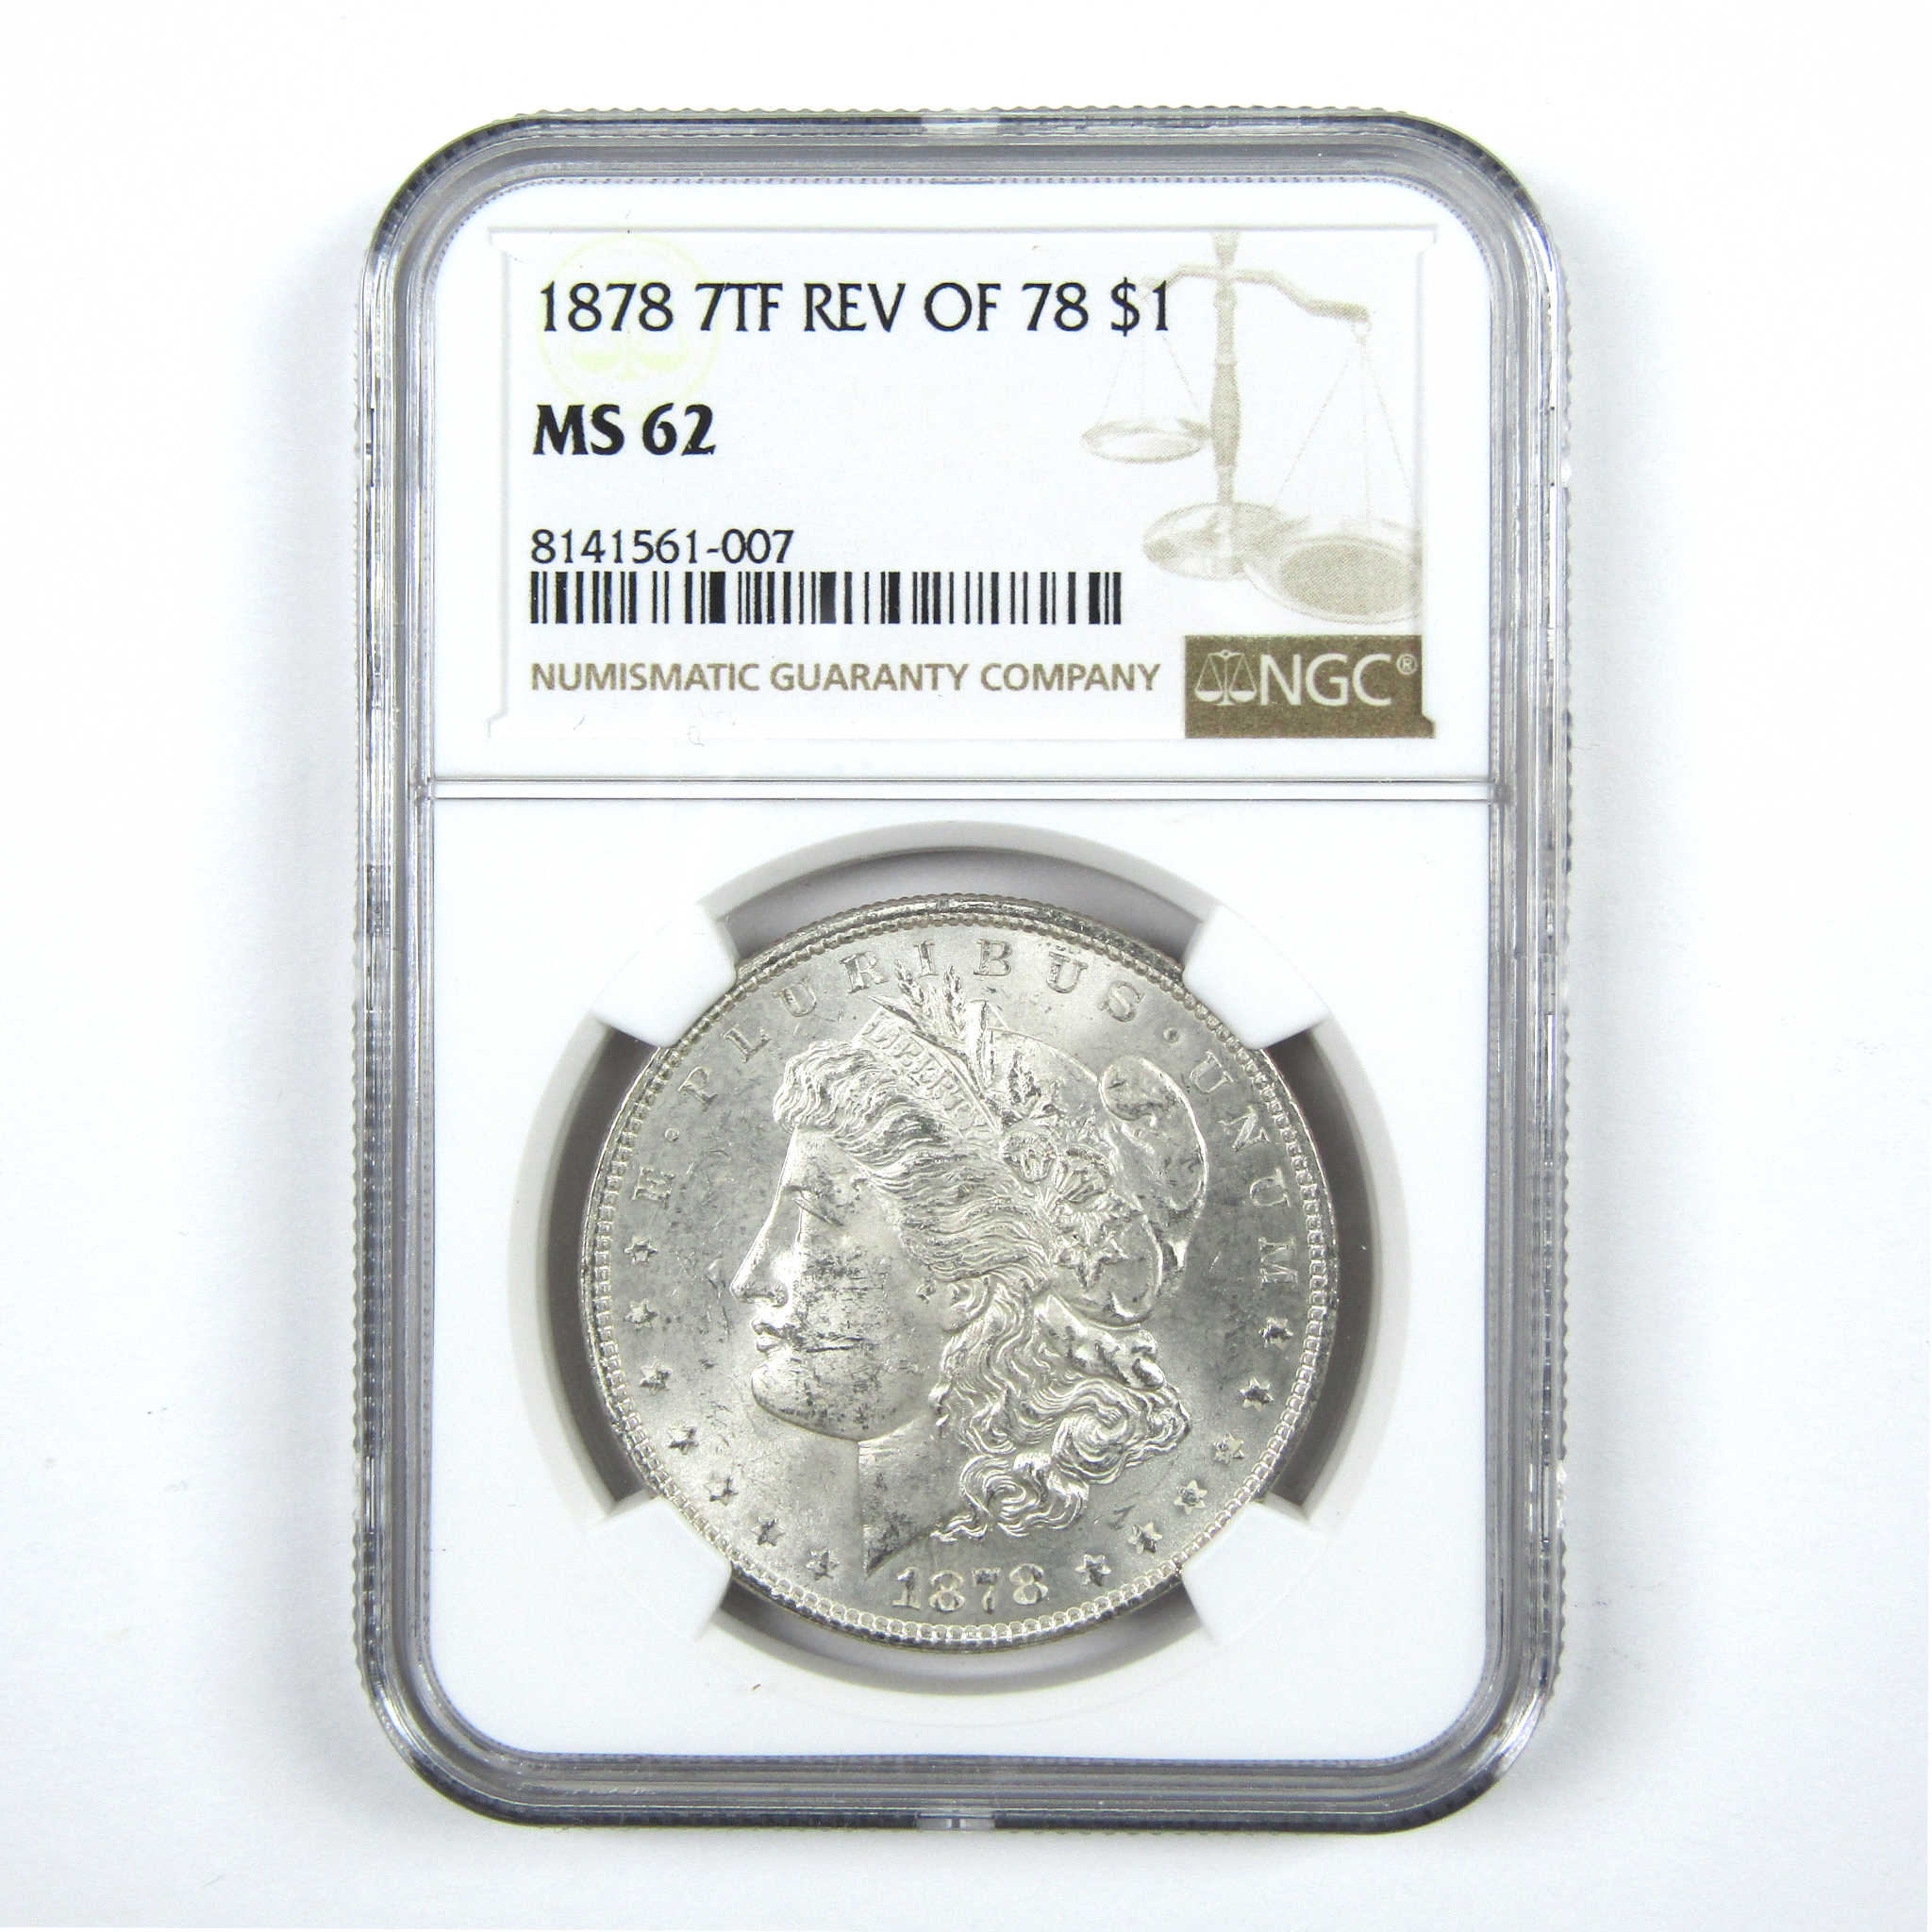 1878 7TF Rev 78 Morgan Dollar MS 62 NGC Uncirculated SKU:I14024 - Morgan coin - Morgan silver dollar - Morgan silver dollar for sale - Profile Coins &amp; Collectibles